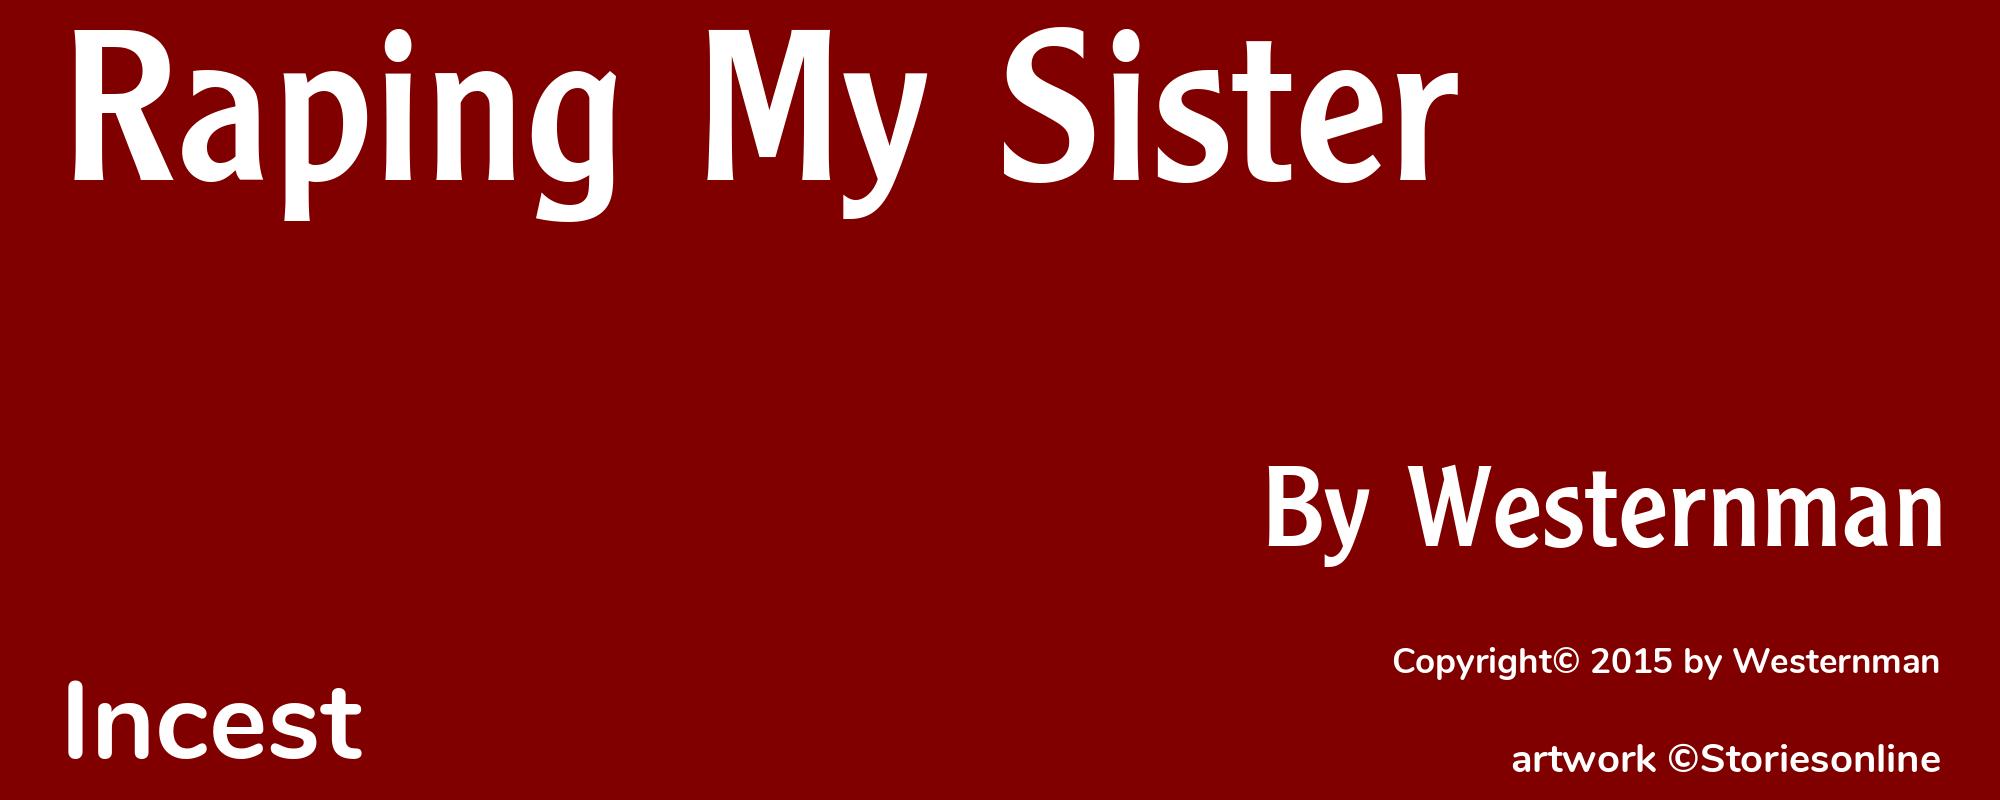 Raping My Sister - Cover